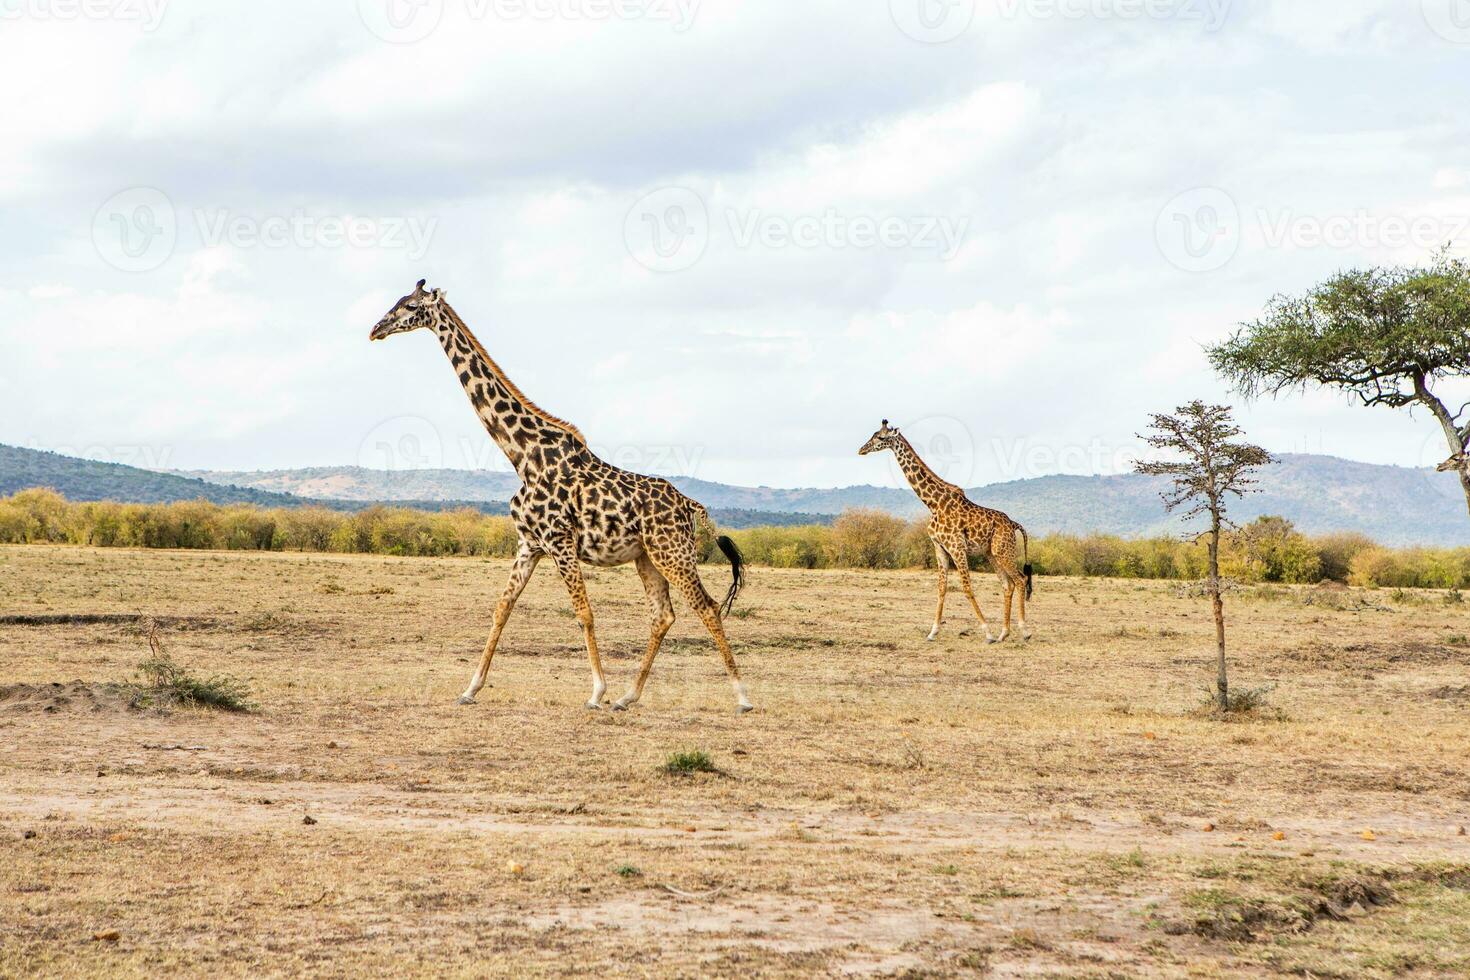 Safari through the wild world of the Maasai Mara National Park in Kenya. Here you can see antelope, zebra, elephant, lions, giraffes and many other African animals. photo